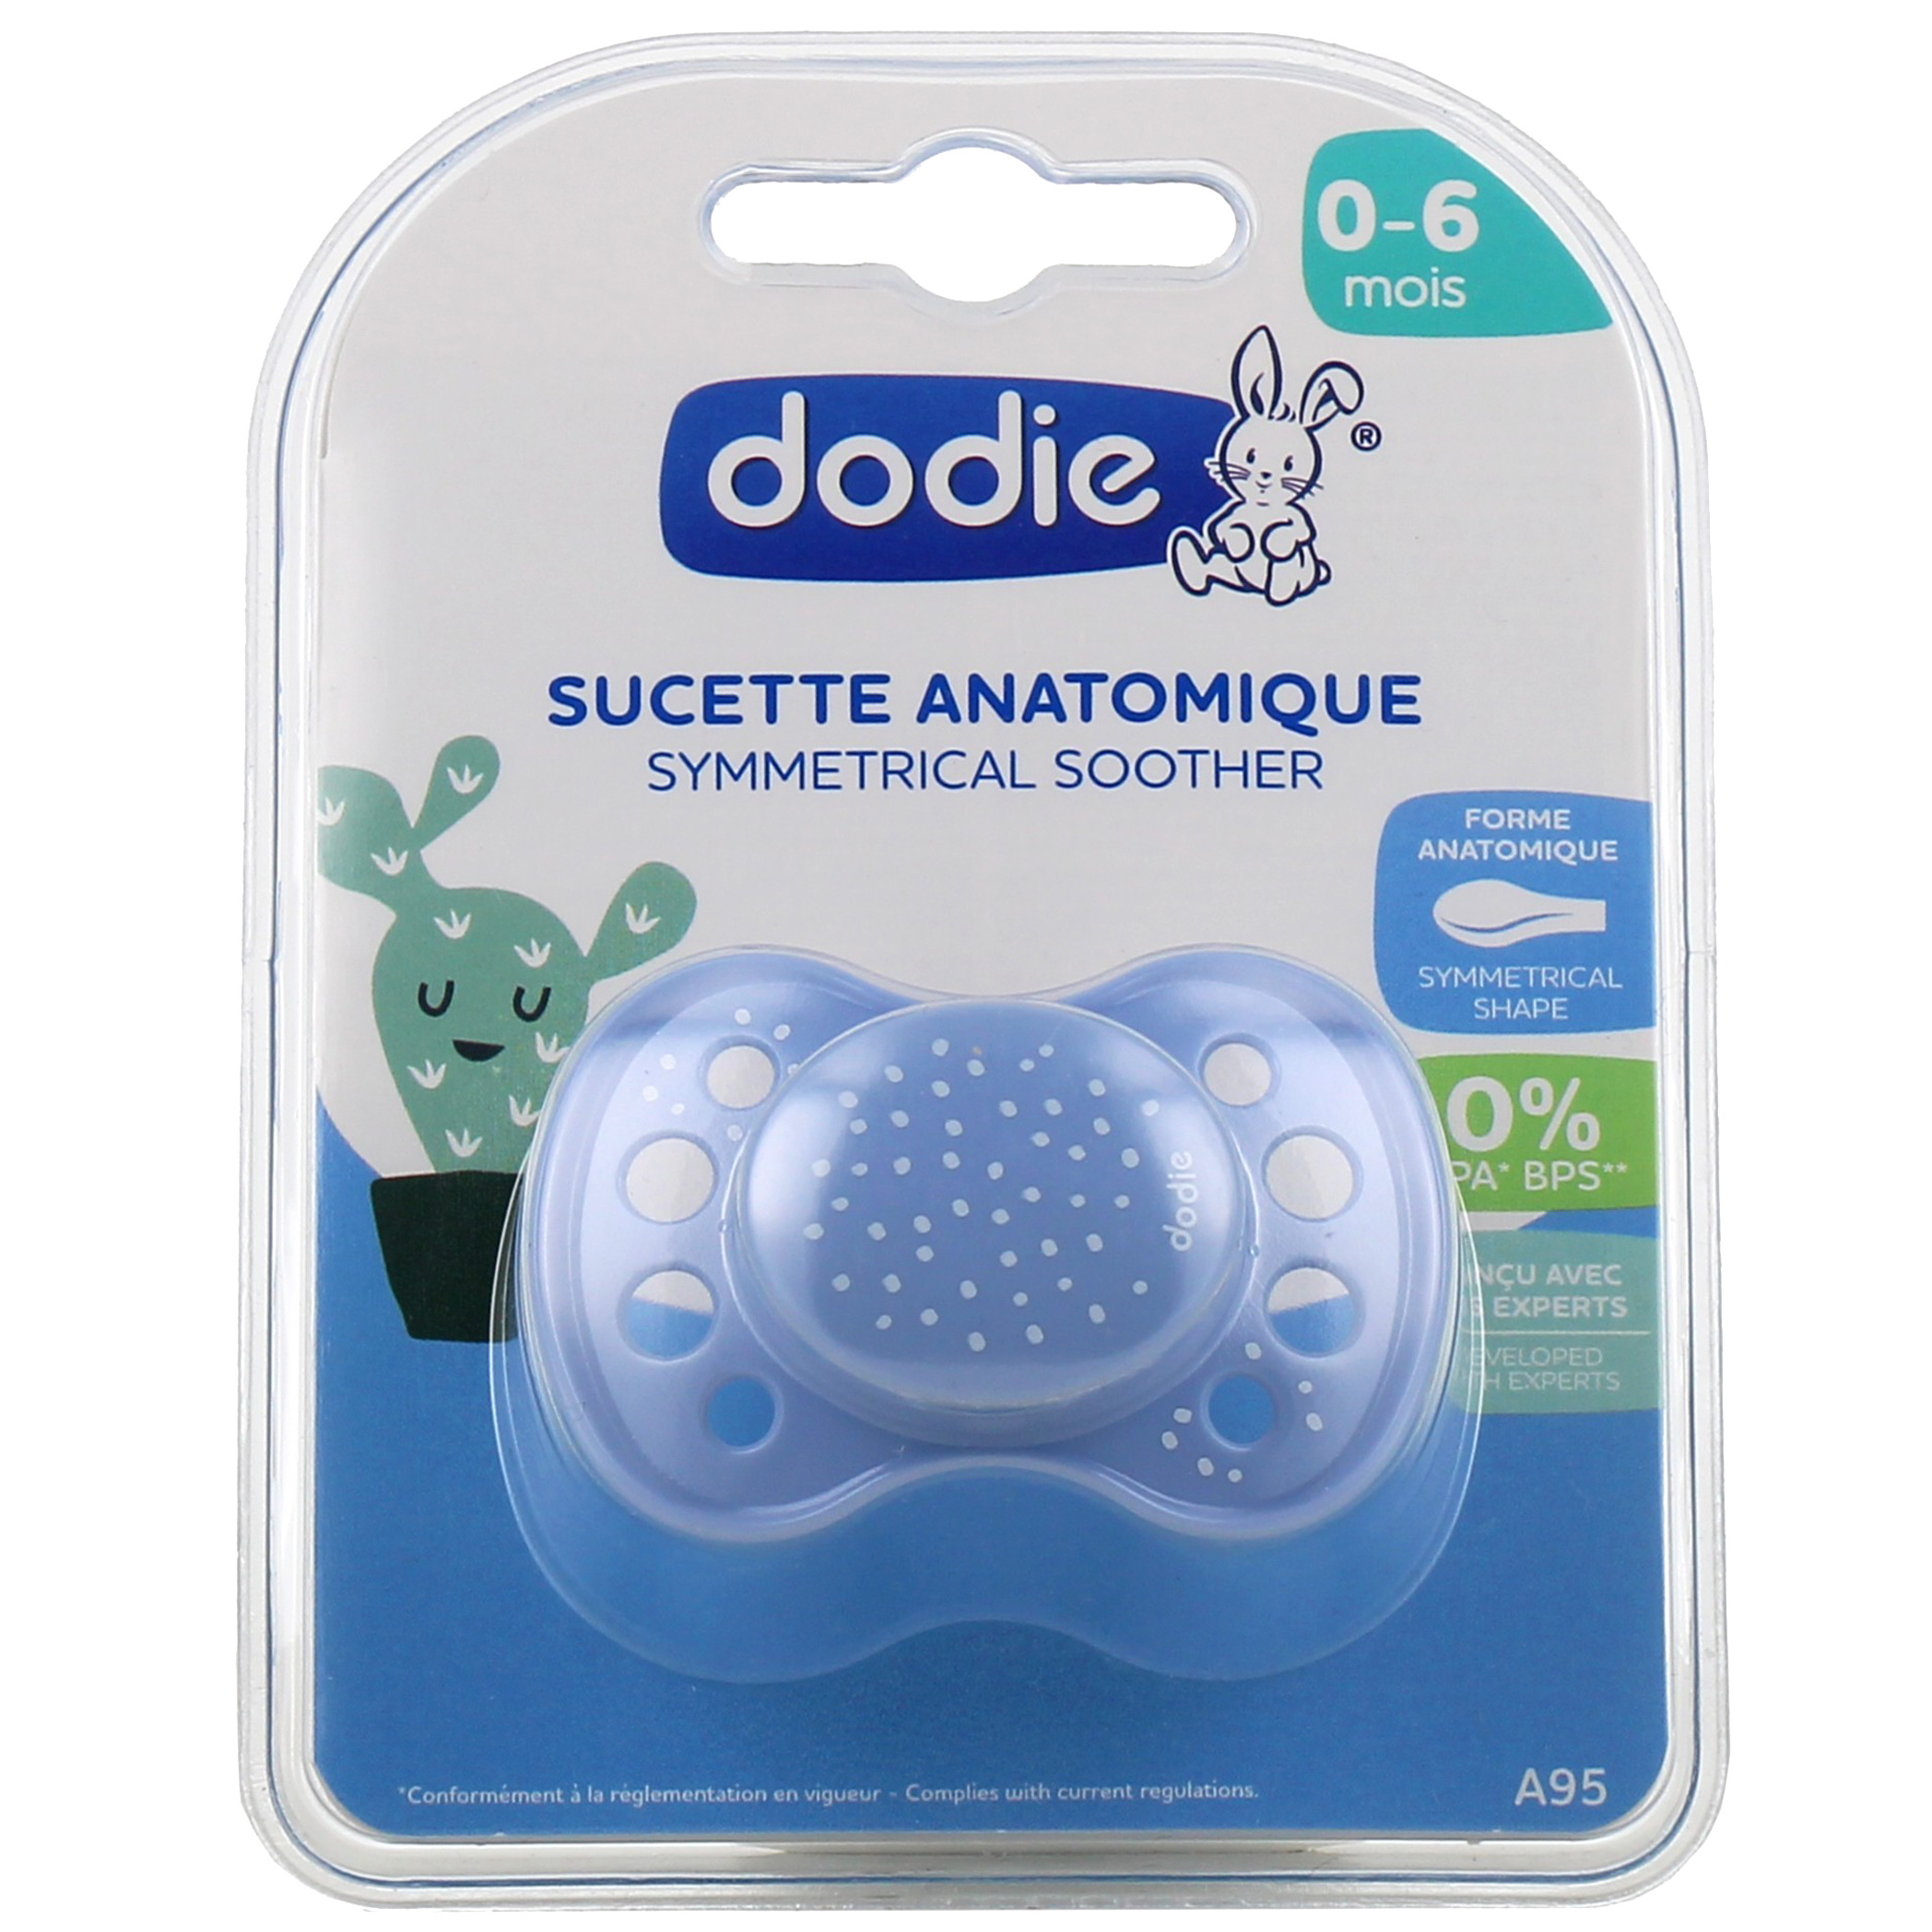 DODIE SUCETTE ANATOMIQUE SILICONE 0-6 MOIS N39 - My Mall Beauty